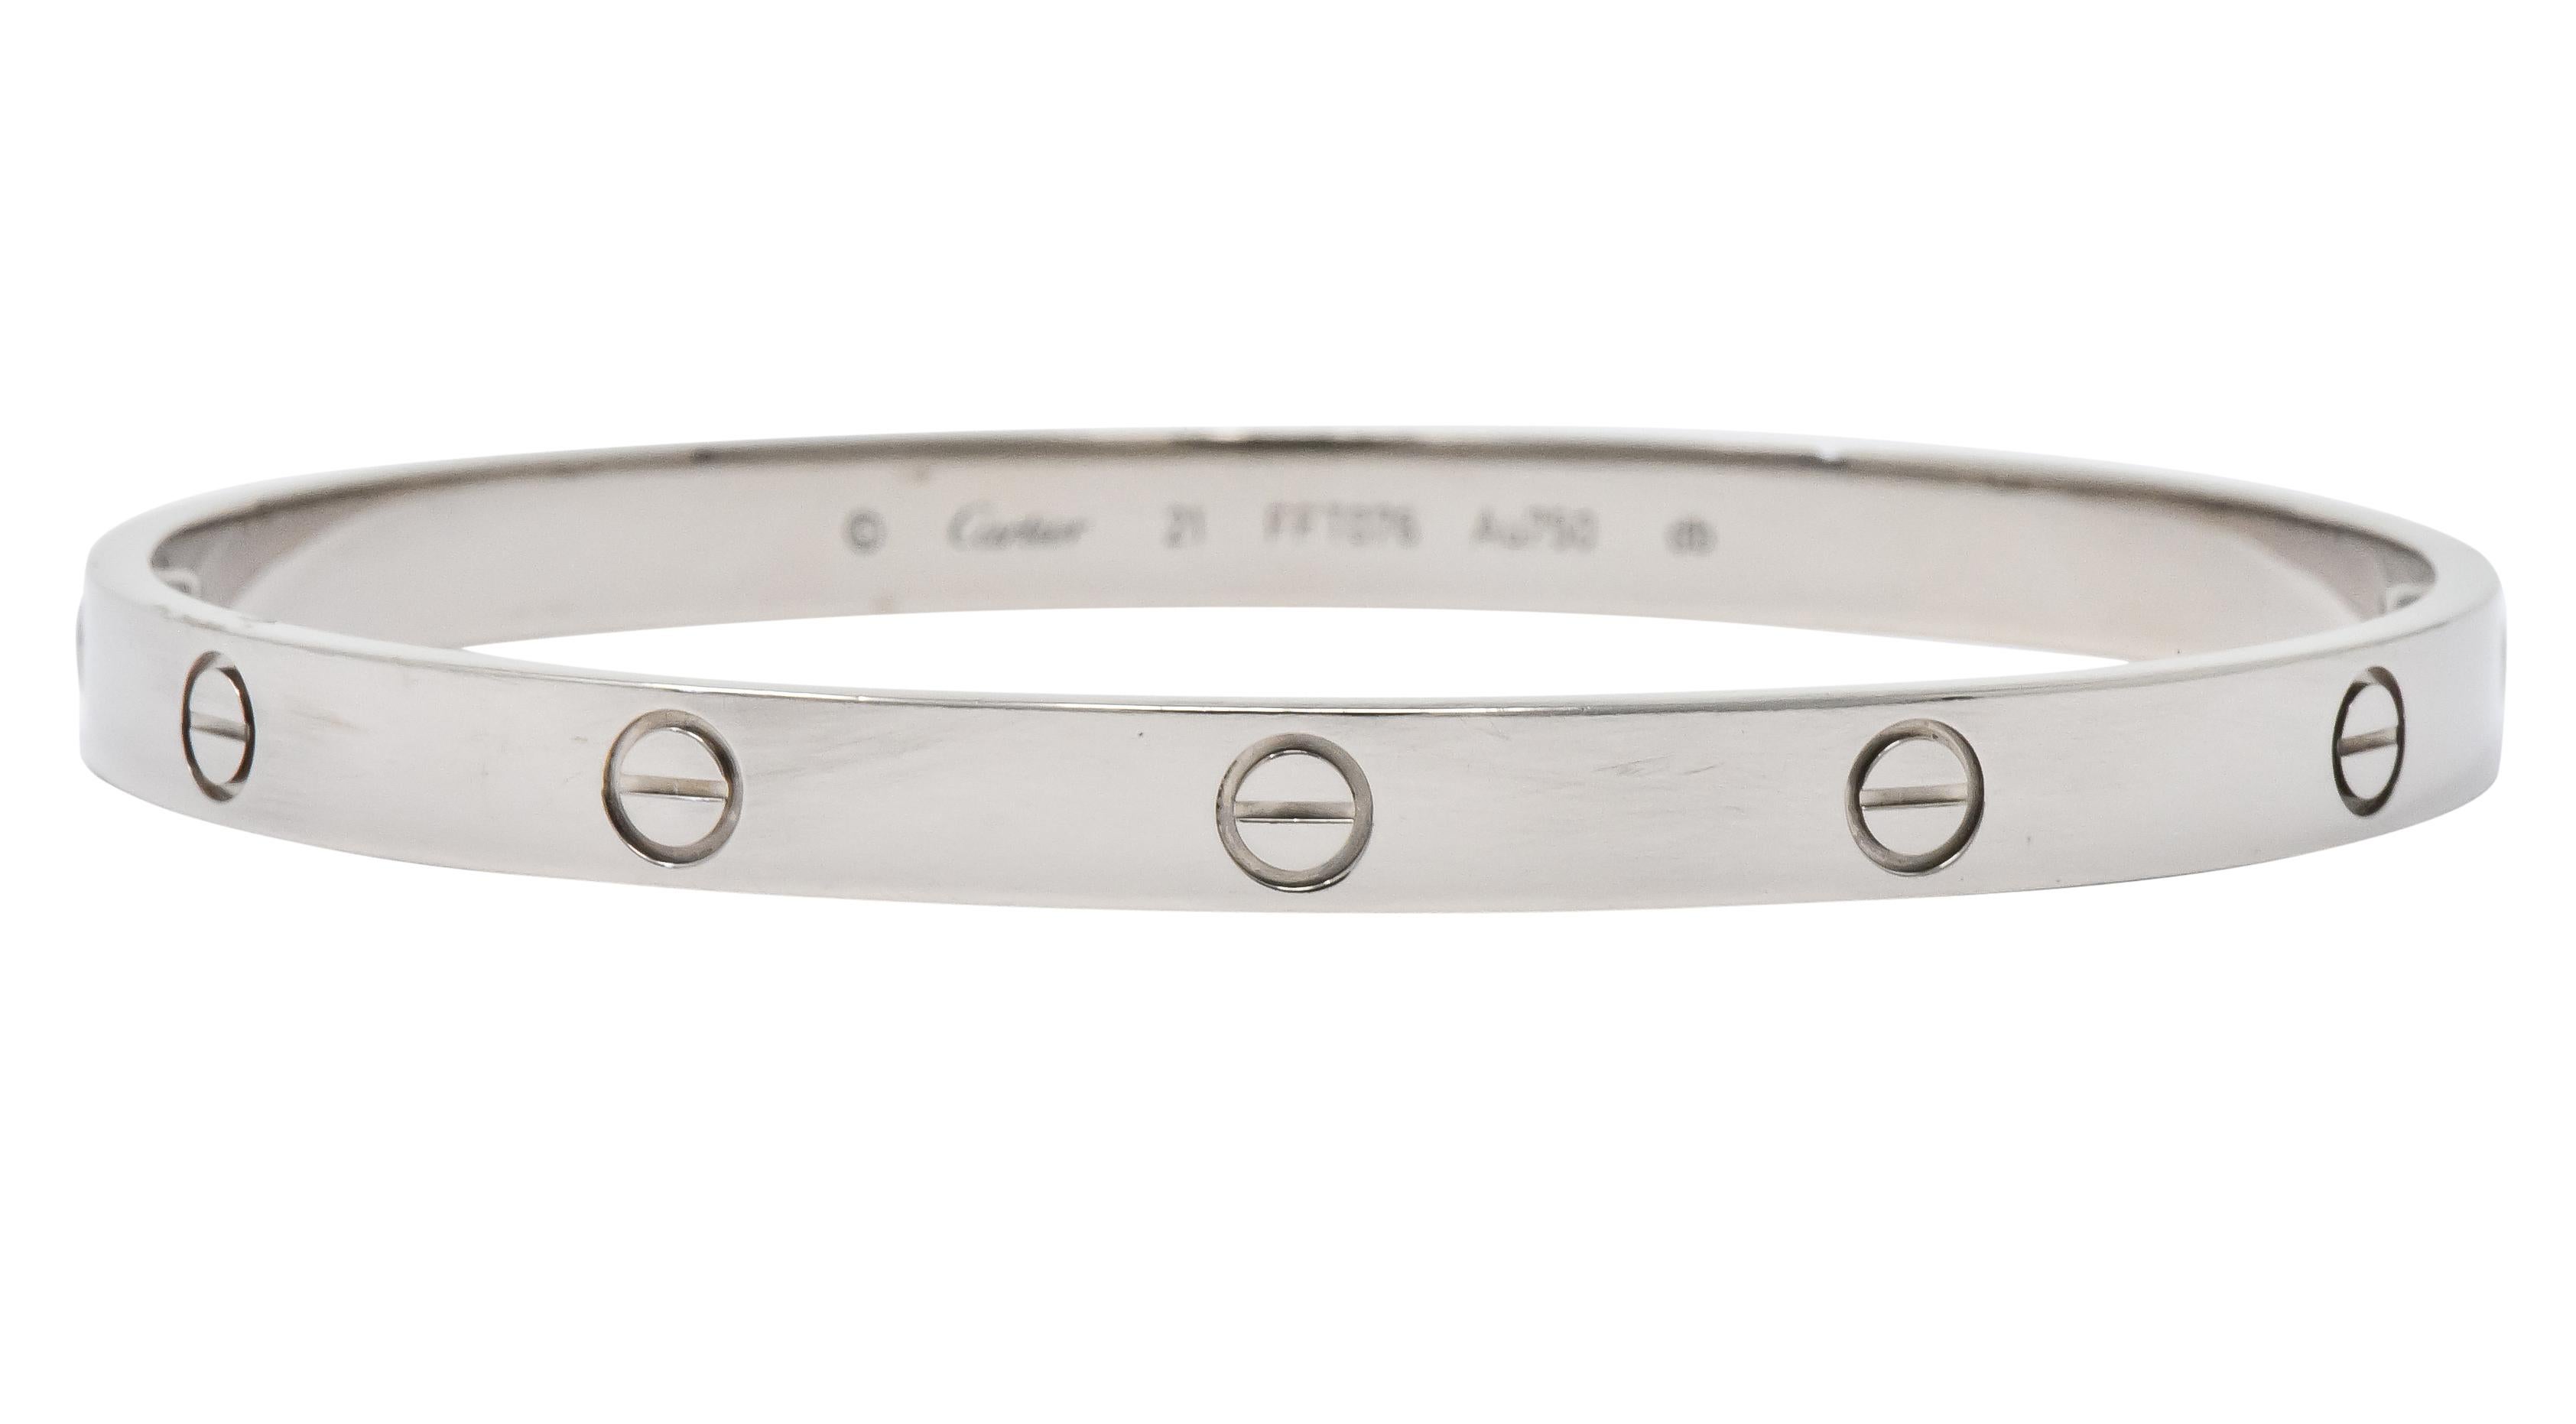 Bangle style bracelet deeply engraved with iconic screw head motif

With a high polished finish

Opens via two removable screws

From the coveted Love collection

Numbered and fully signed Cartier

Stamped Au 750 for 18 karat gold

Inner